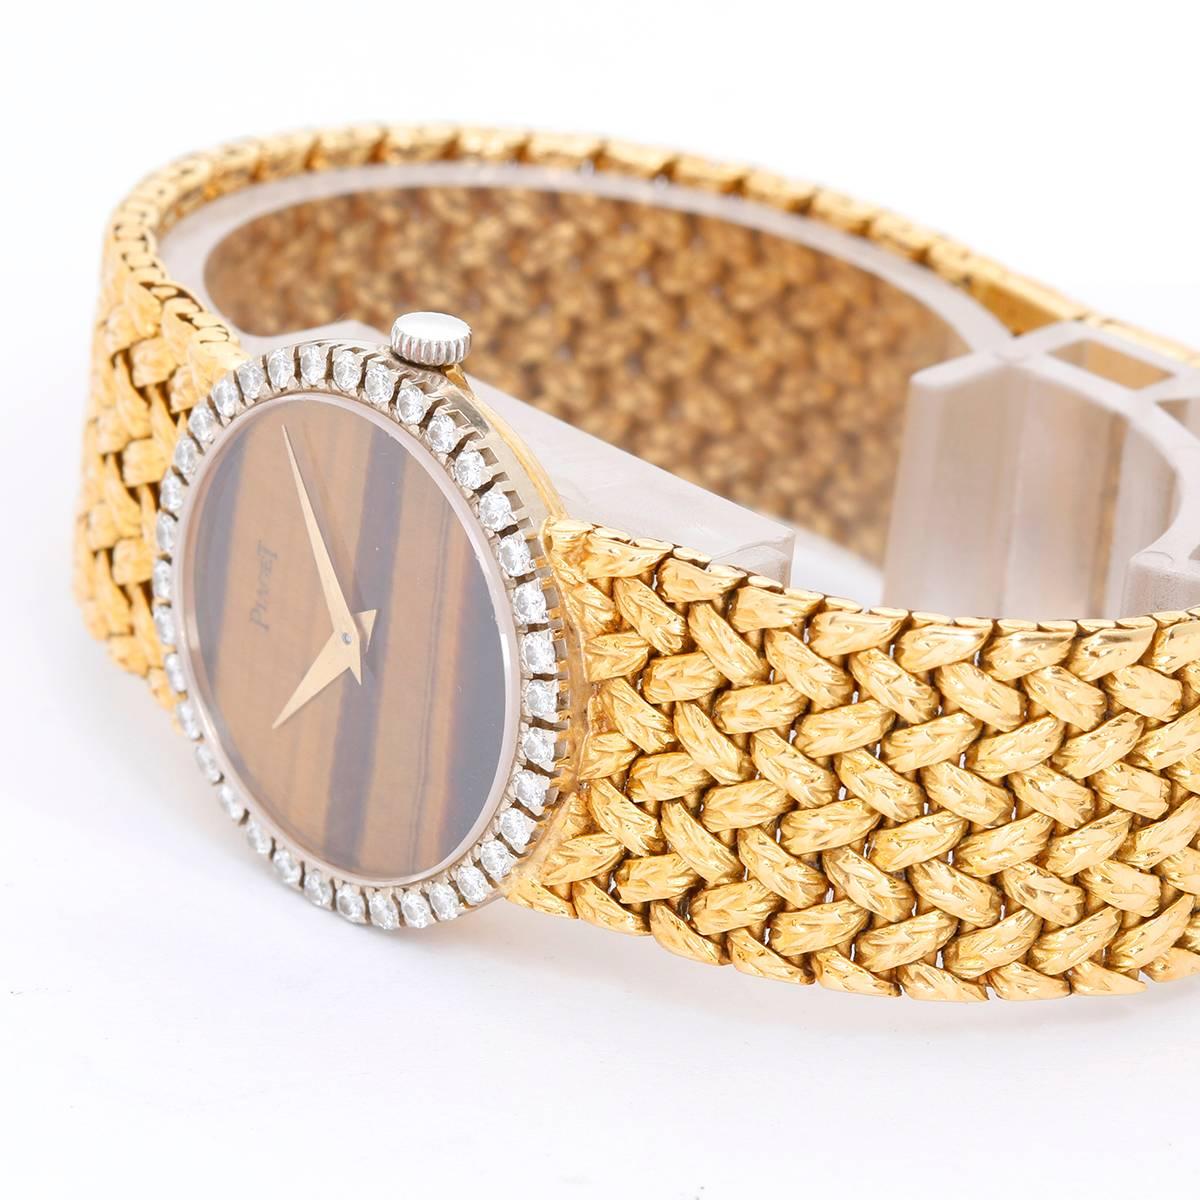 Piaget 18K Yellow Gold Tiger's Eye Dial Ladies Watch -  Automatic. 18K Yellow Gold (24 mm ). Tiger's eye dial with a diamond bezel. 18K Yellow Gold piaget mesh bracelet. Pre-owned with box.